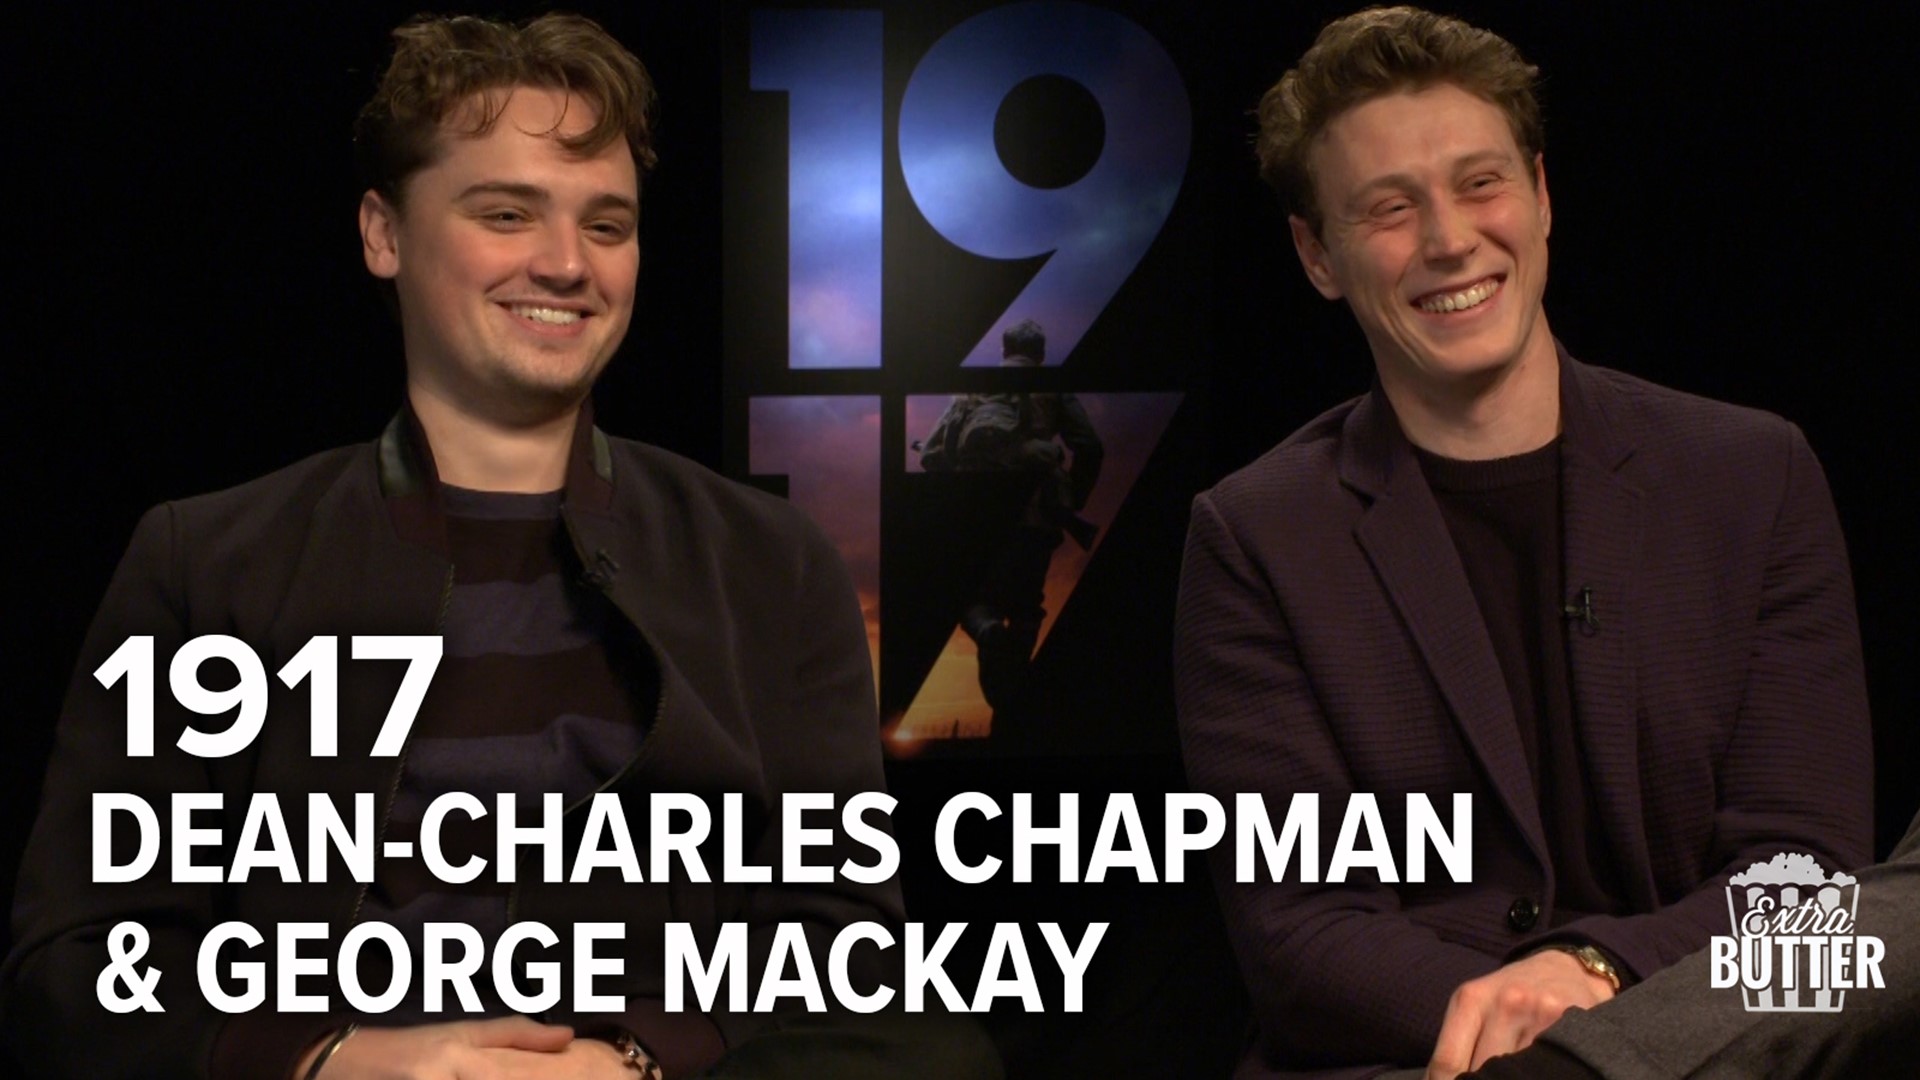 Dean Charles Chapman and George MacKay talk about the unusual making of the war movie '1917' with Sam Mendes.